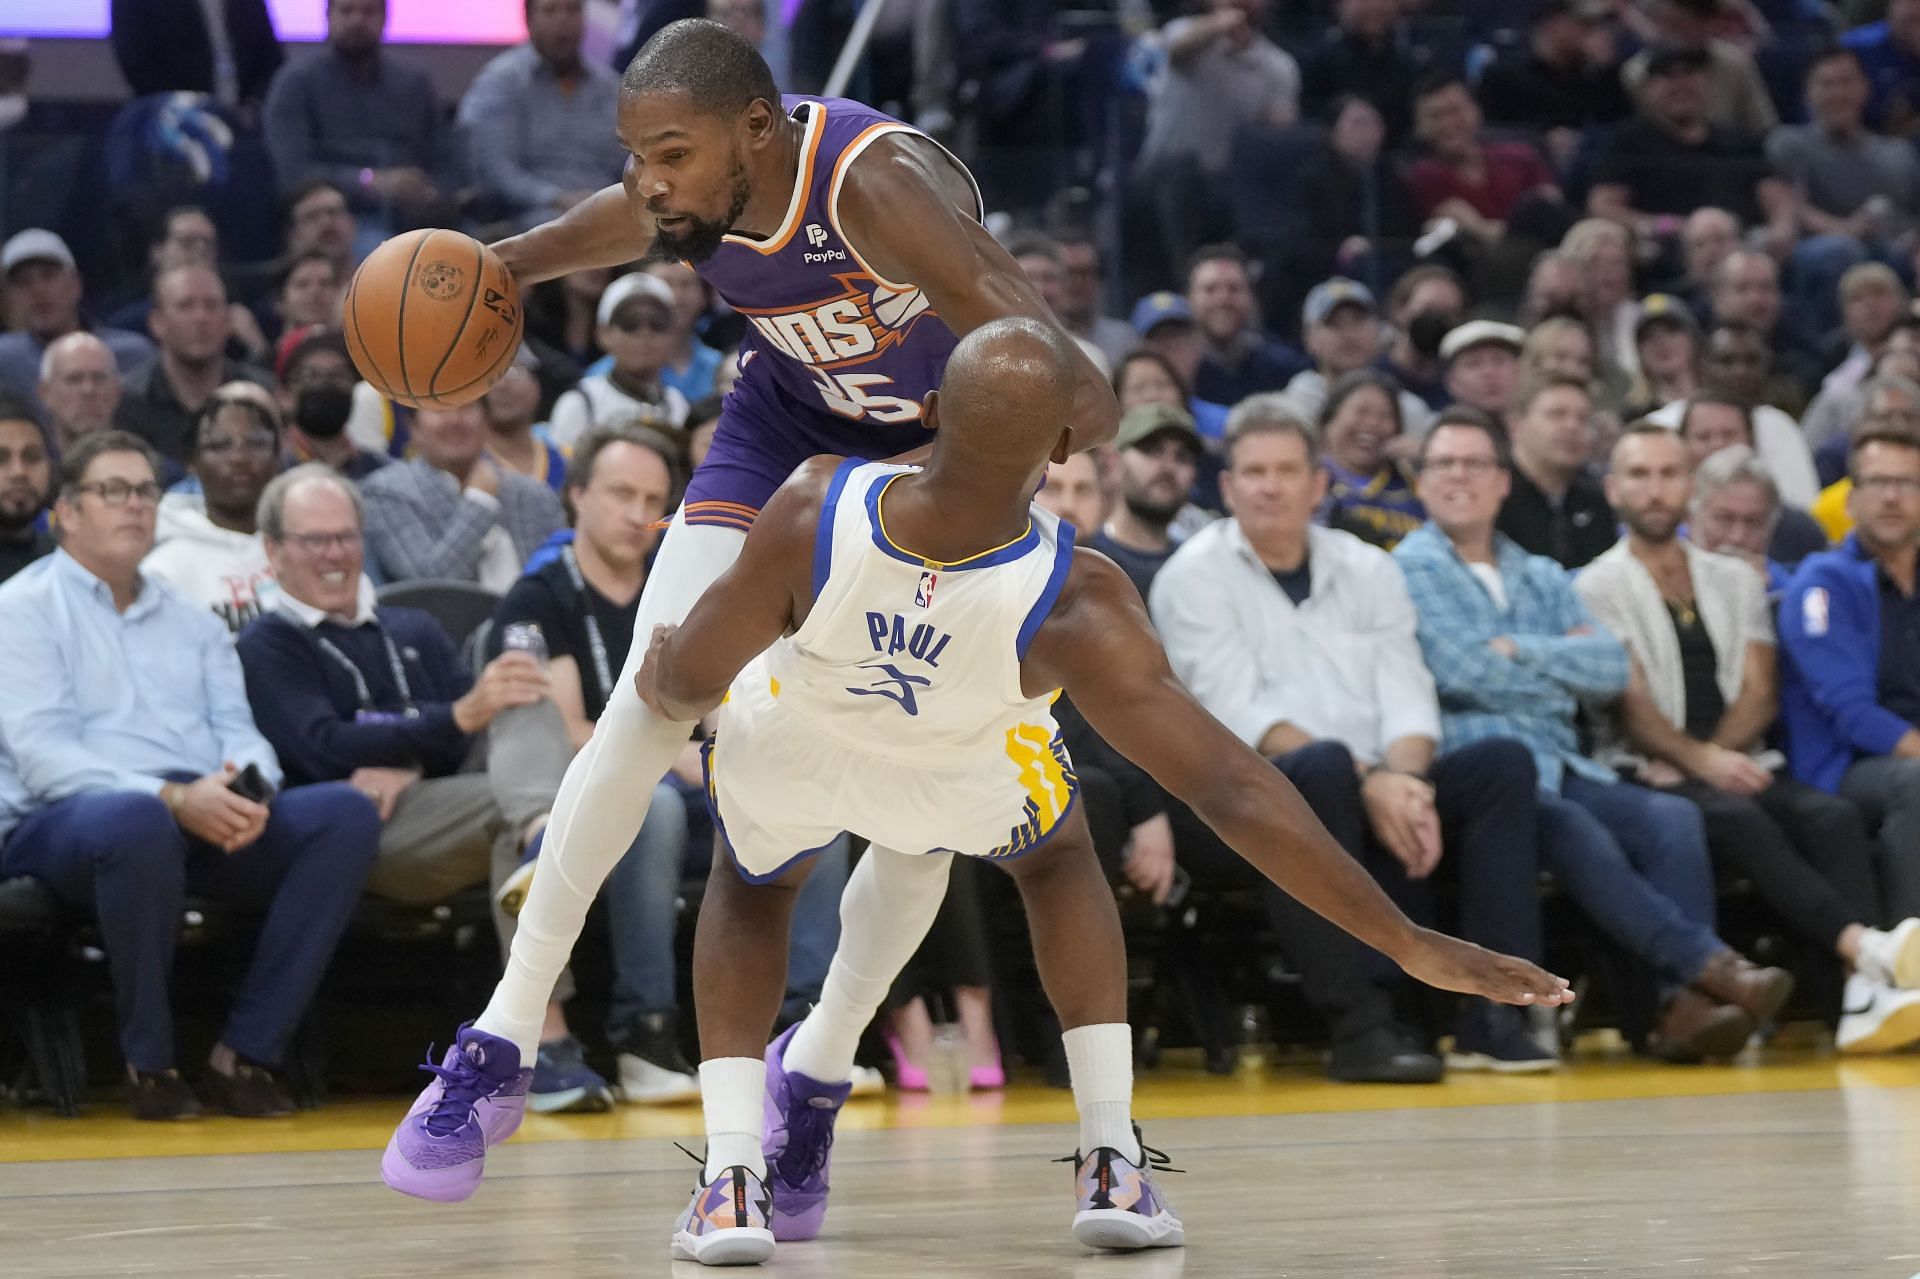 Watch: Chris Paul locks down Kevin Durant and then draws a charge on him